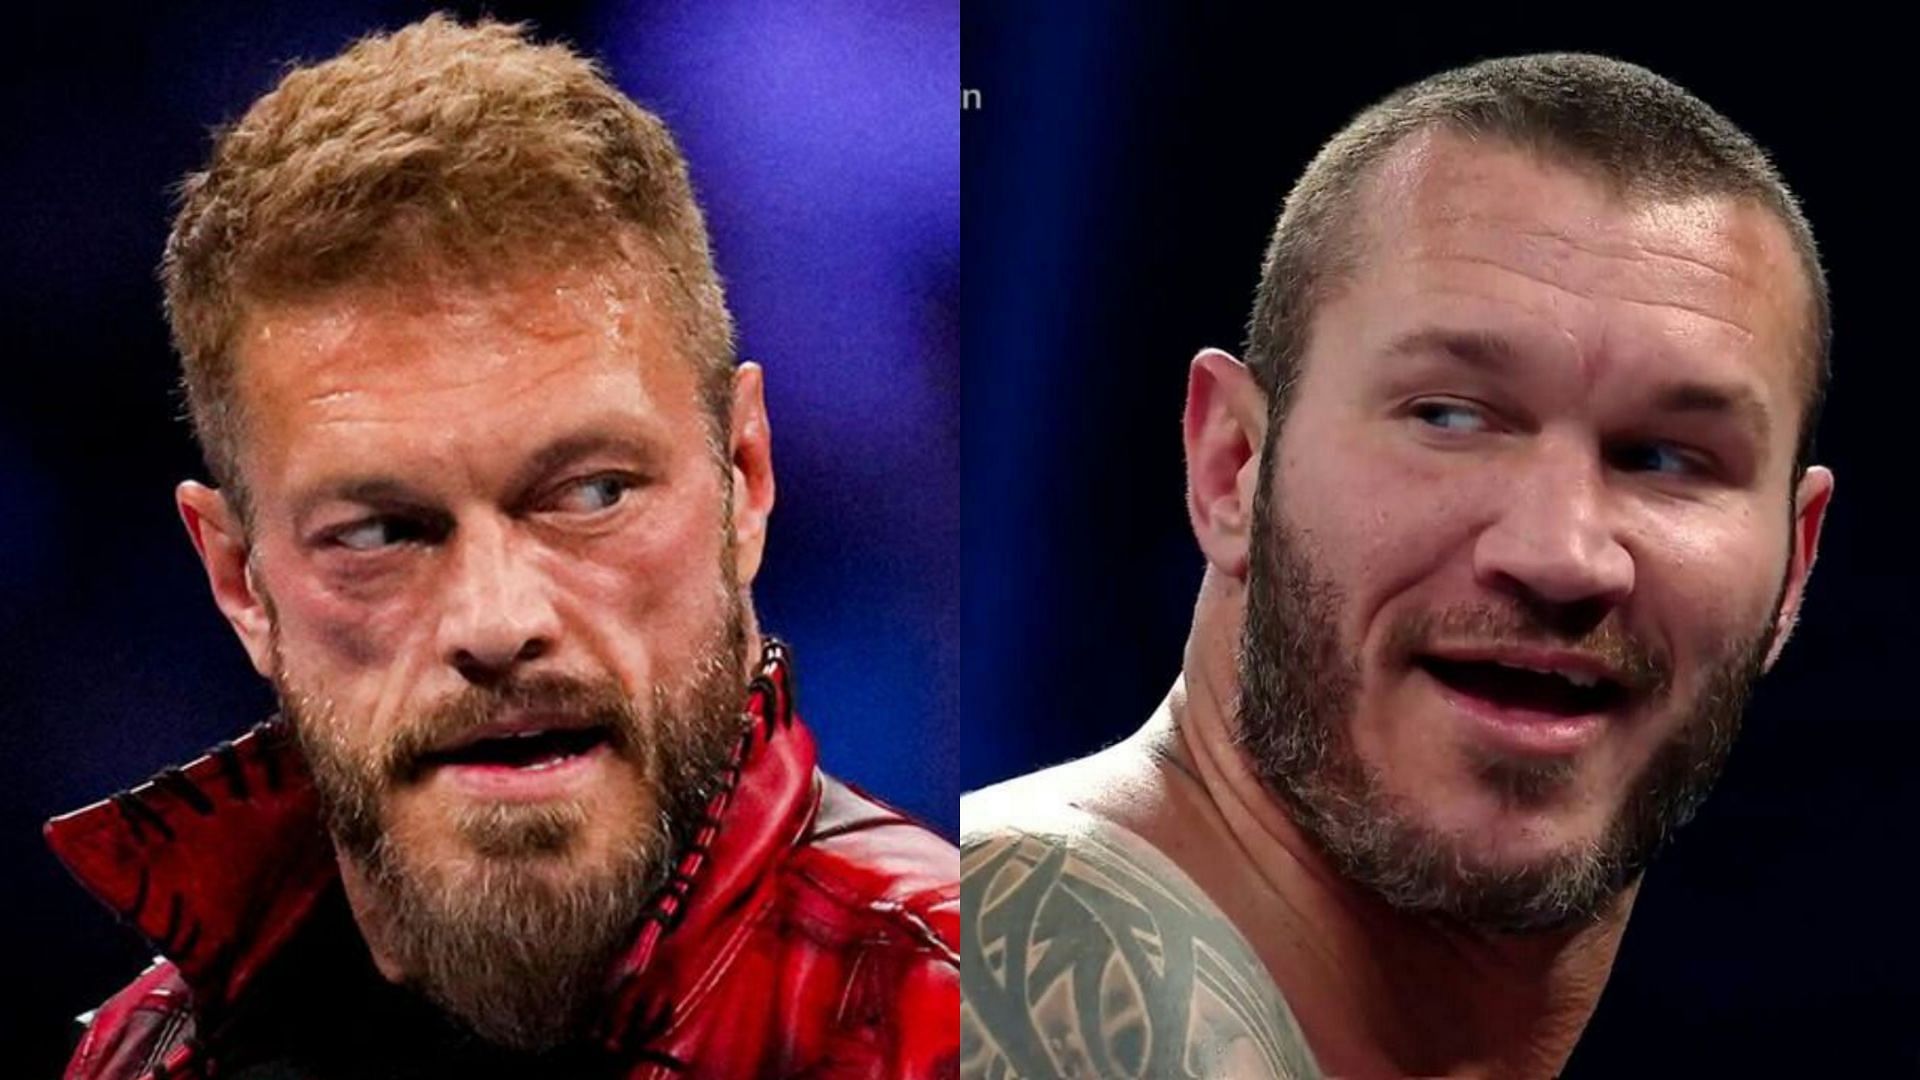 WWE Hall of Famer Edge (left) and Randy Orton (right)